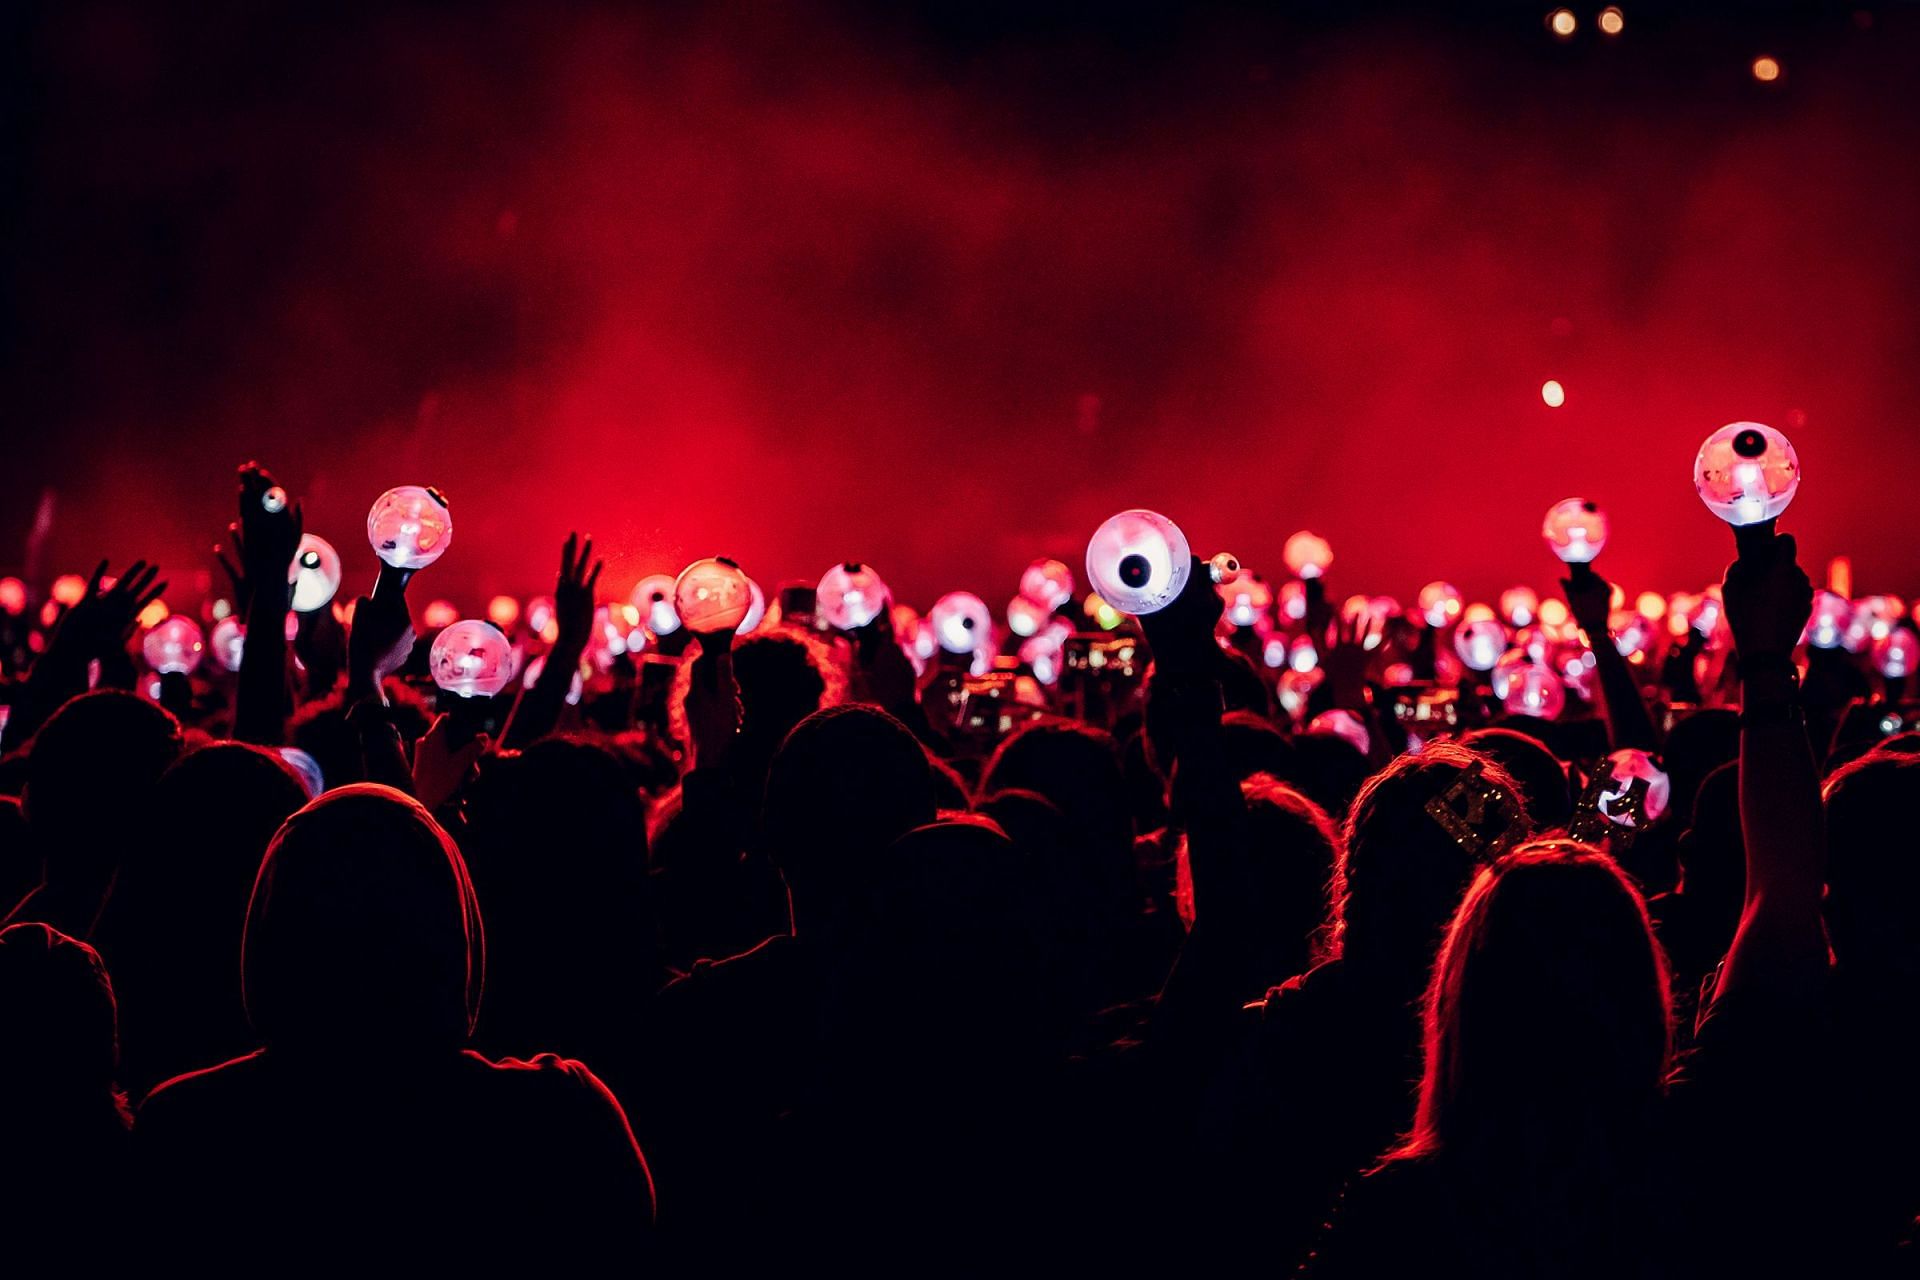 BTS ARMY is arguably one of the biggest, if not the biggest, fandom in the world. (Representational image via unsplash)